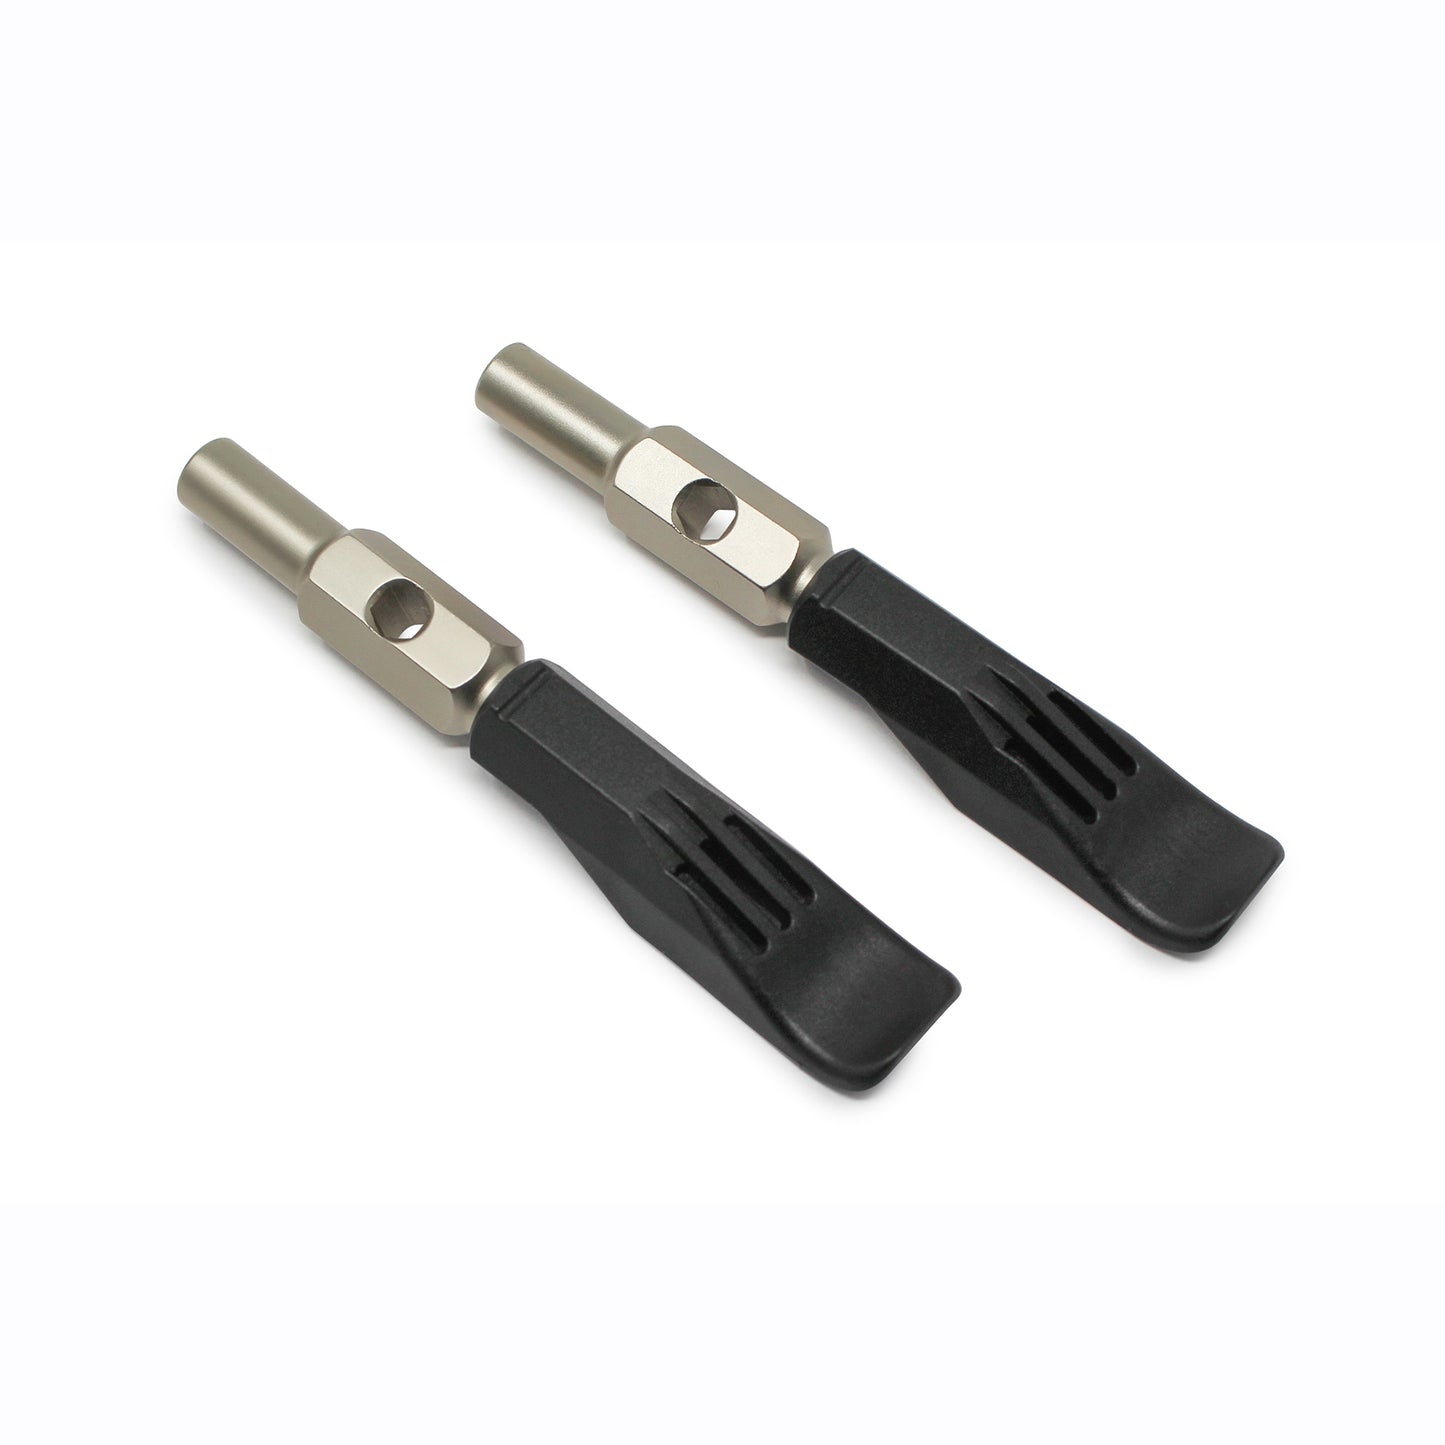 Prestacycle Tire Lever Bits - Pair